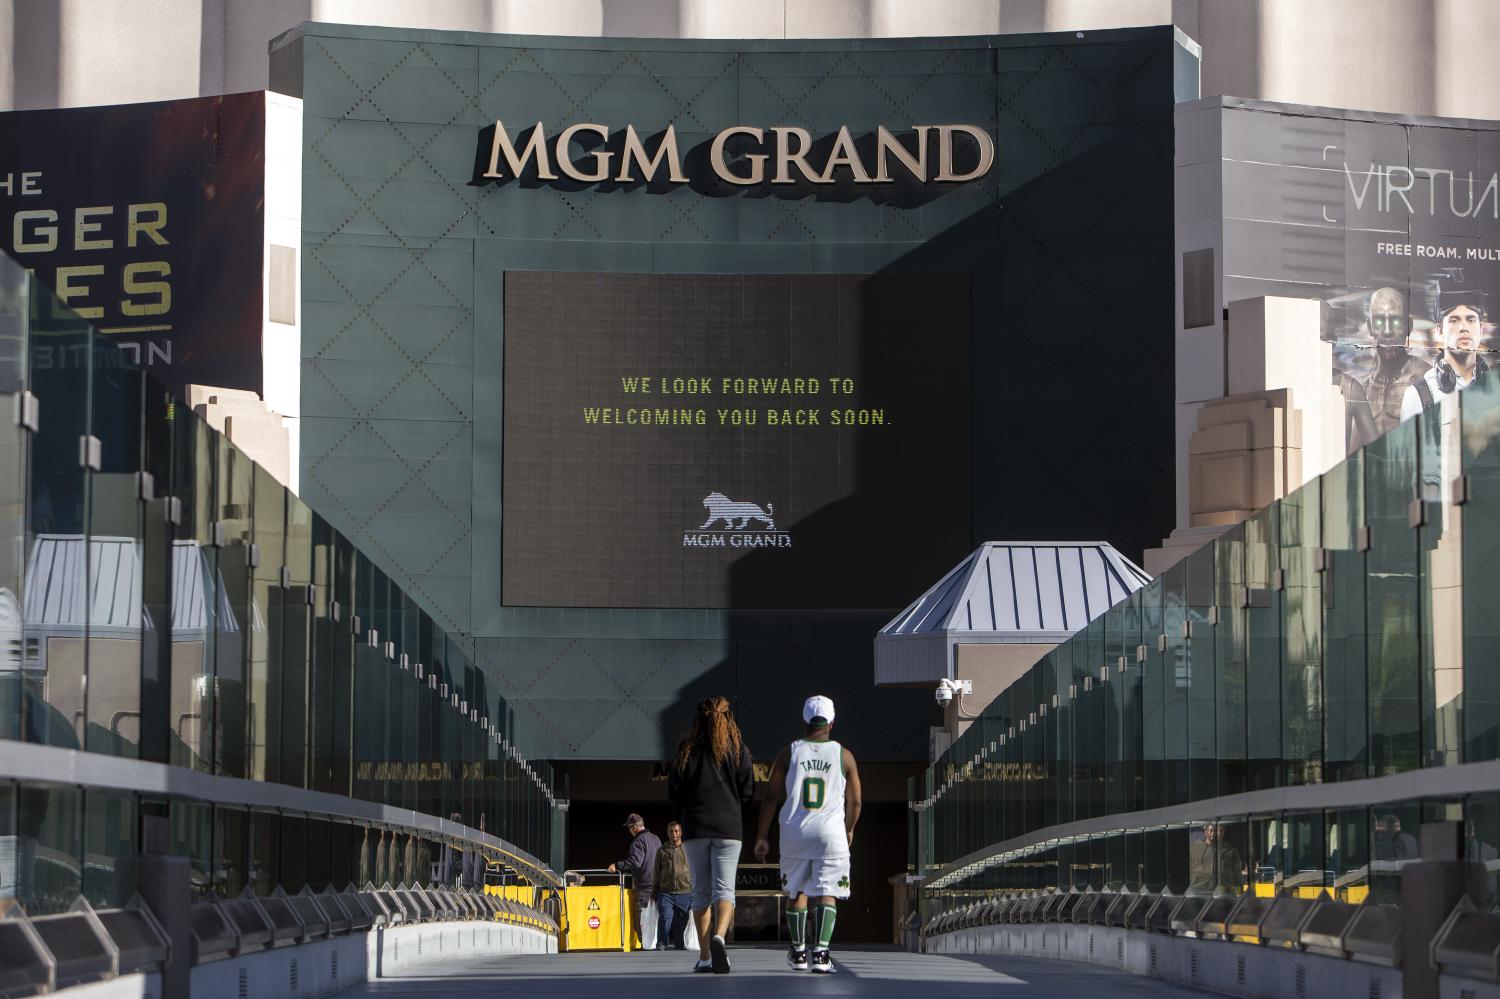 Vegas Unemployment Number Hikes as More MGM Casinos Furlough Their Employees